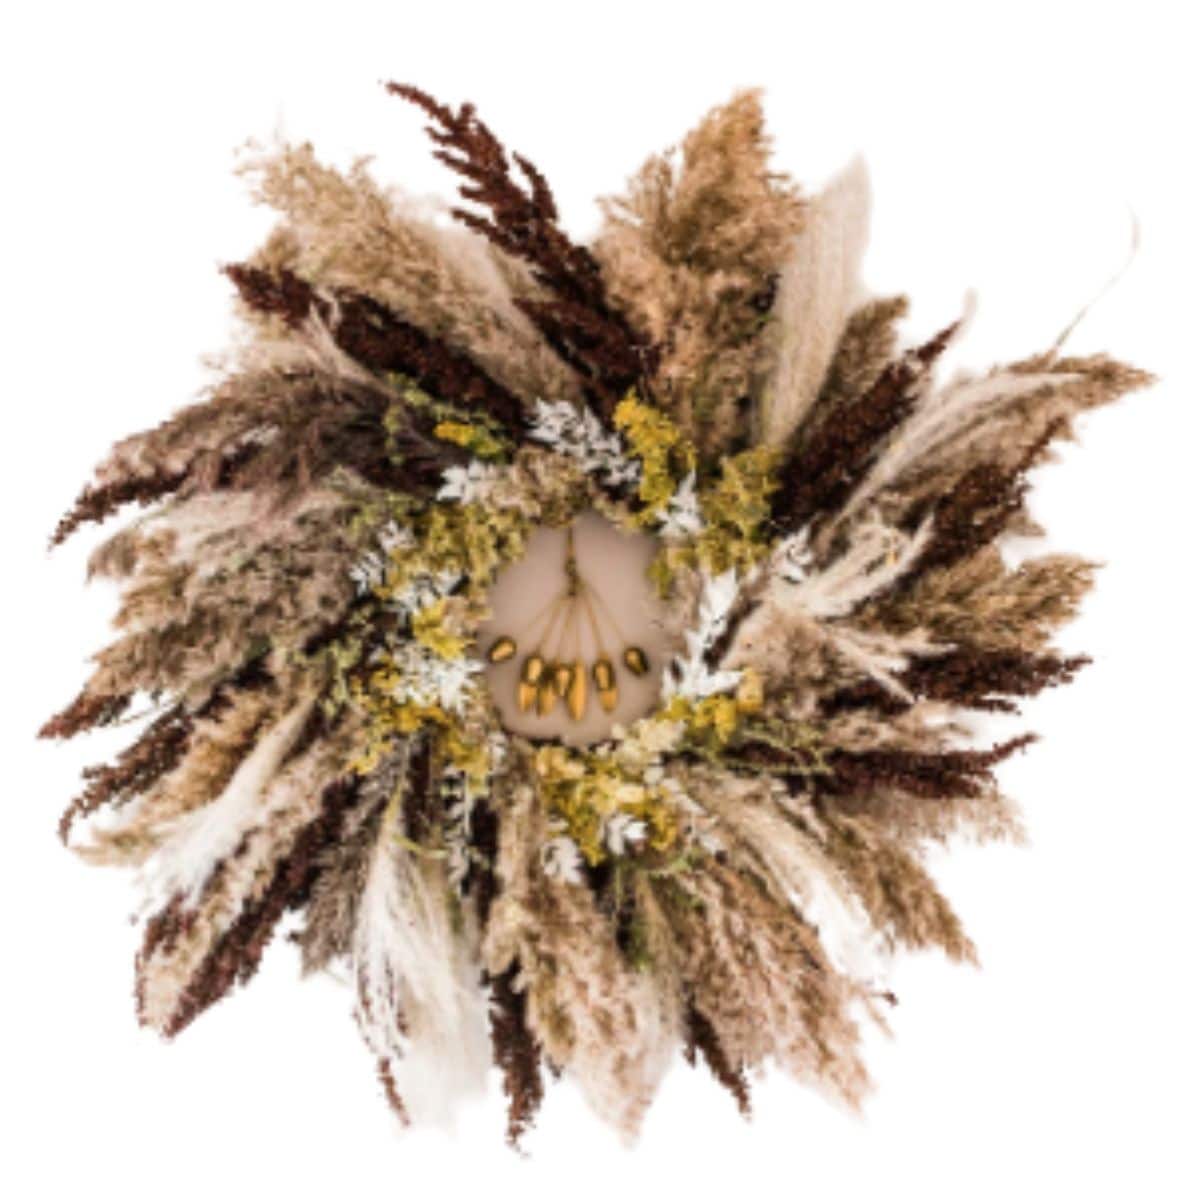 wreath made with dried natural grasses, yellow goldenrod, and bunny tail grasses or bleached Italian ruscus from etsy